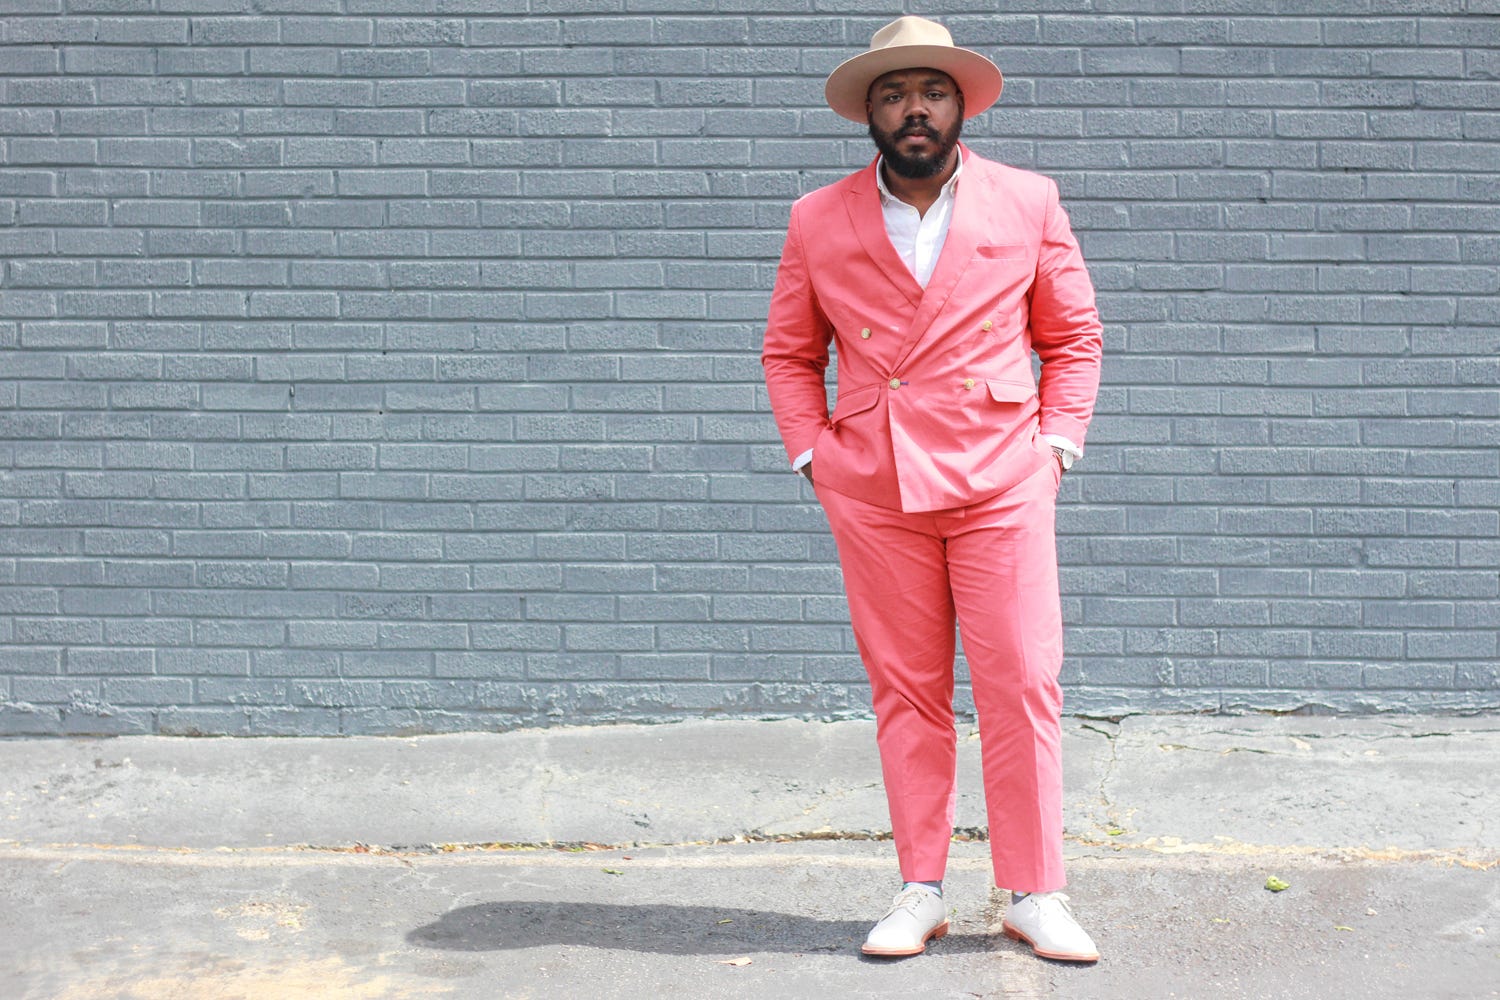 notoriously dapper bright suit, men's fashion trends 2019